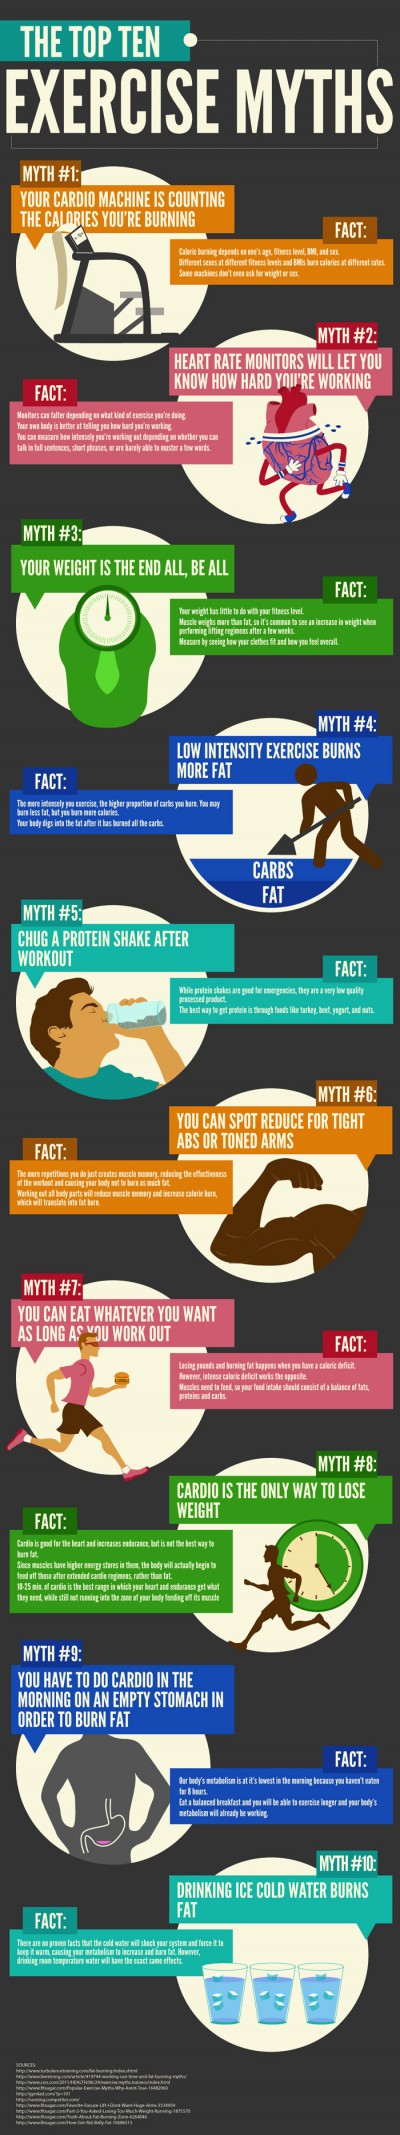 exercise myths infographic 10 Workout Myths And The Truths   Workout Infographics